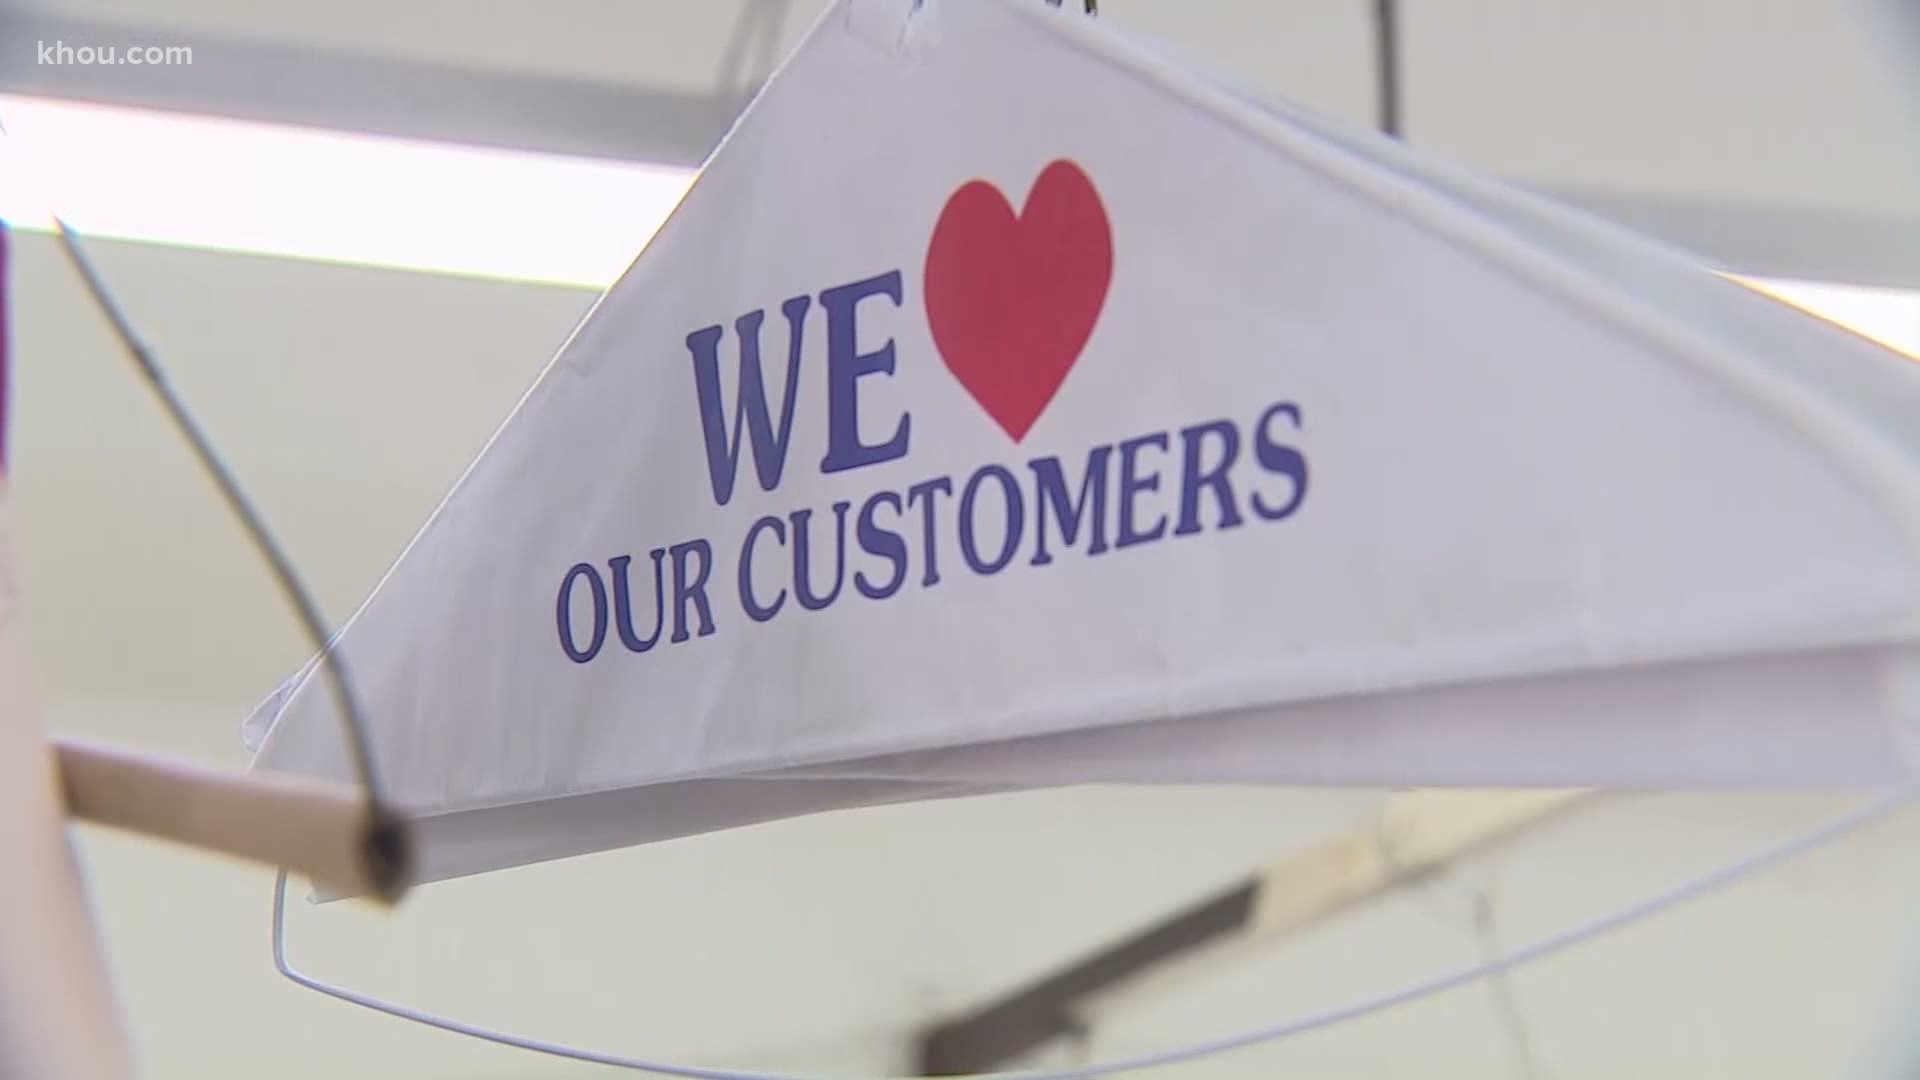 One dry cleaner says business dipped 75% during the pandemic because more people are working from home.